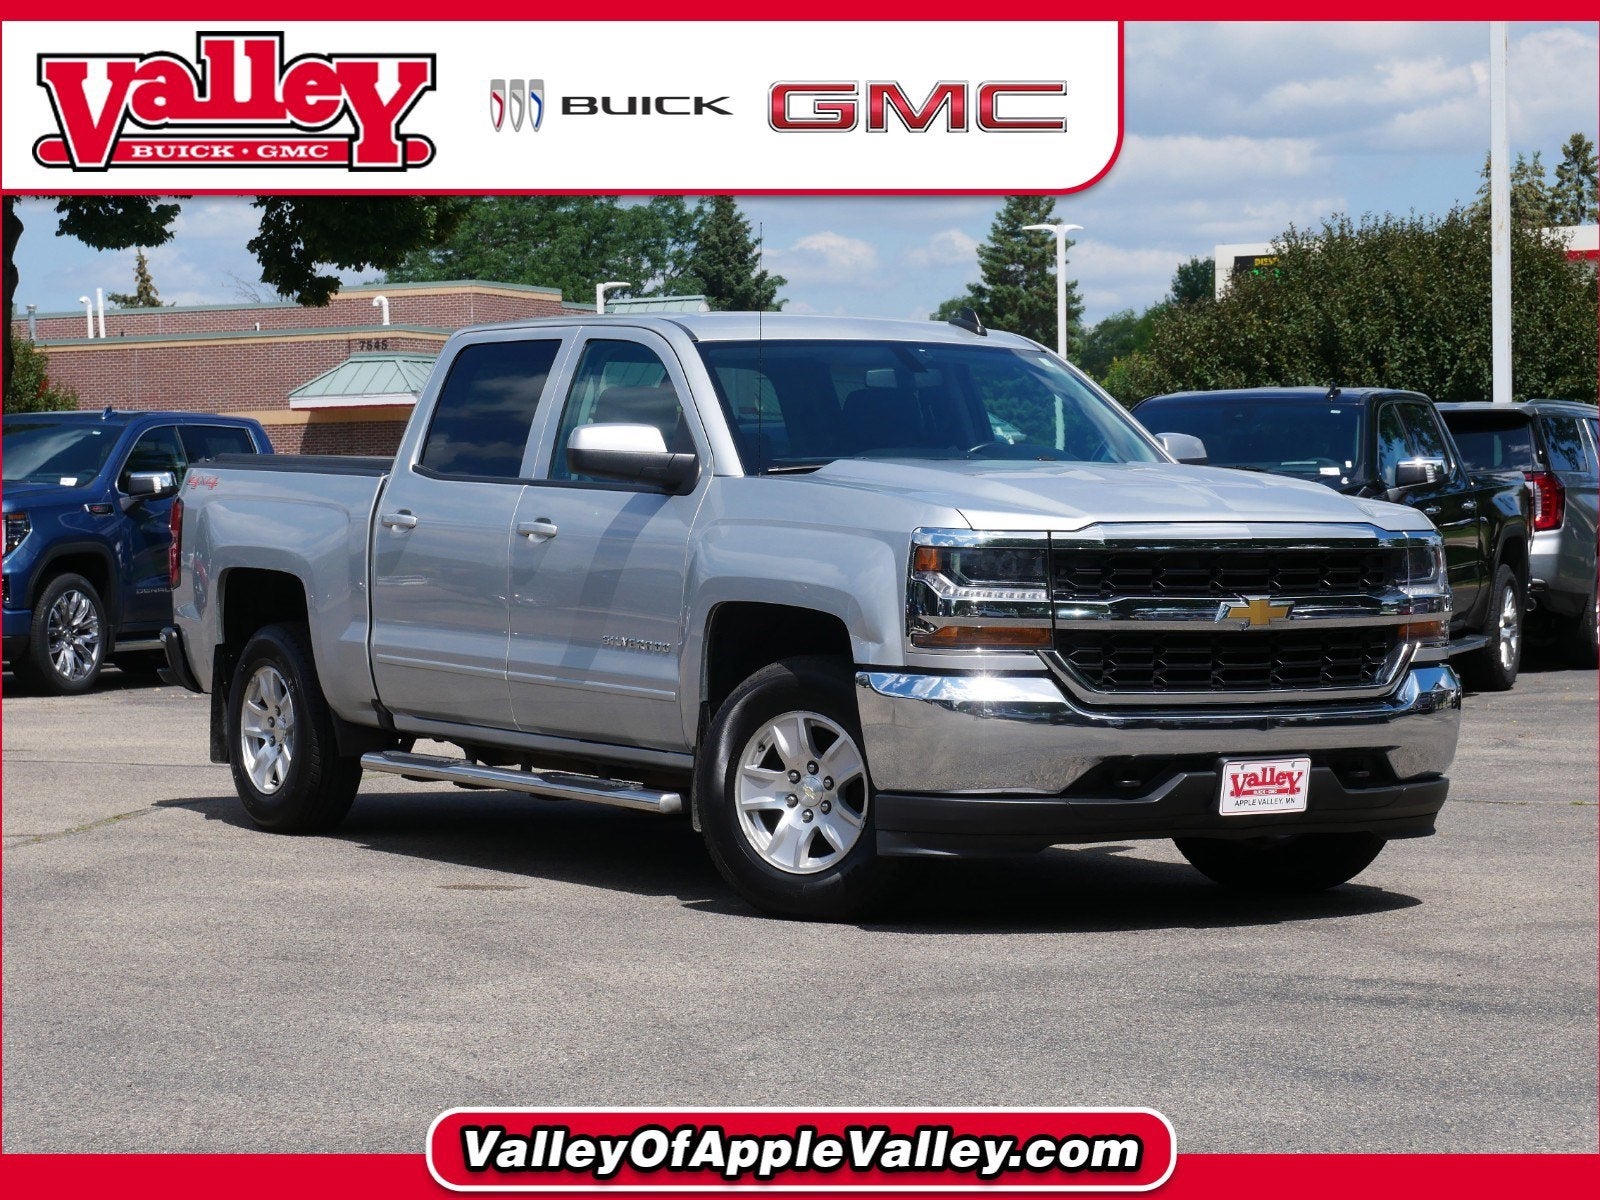 Used 2016 Chevrolet Silverado 1500 LT with VIN 3GCUKREC2GG156047 for sale in Apple Valley, Minnesota